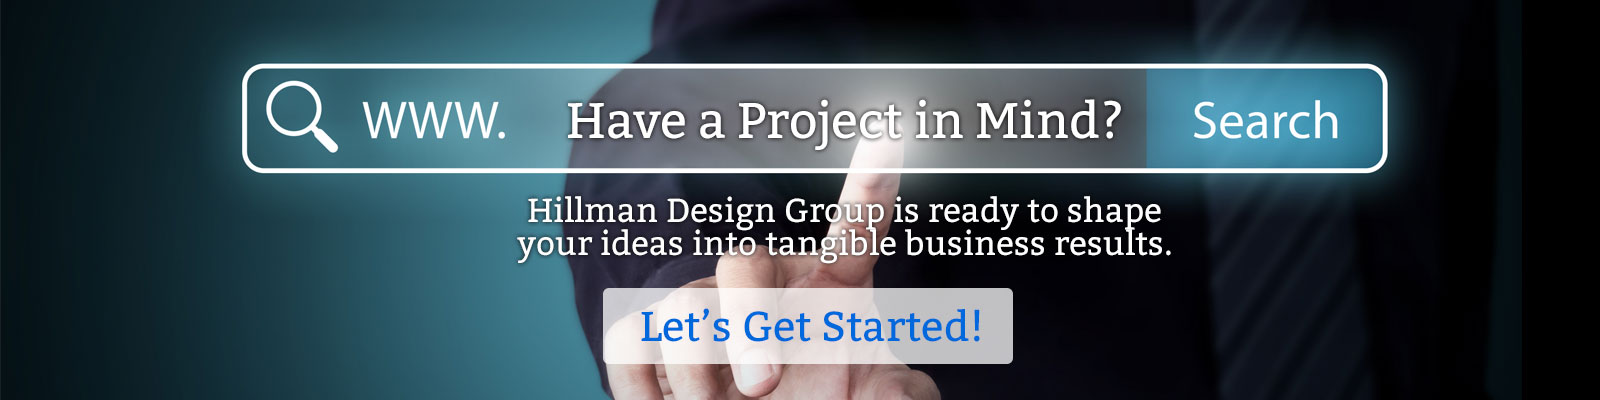 Have a Project in Mind - Let's Get Started